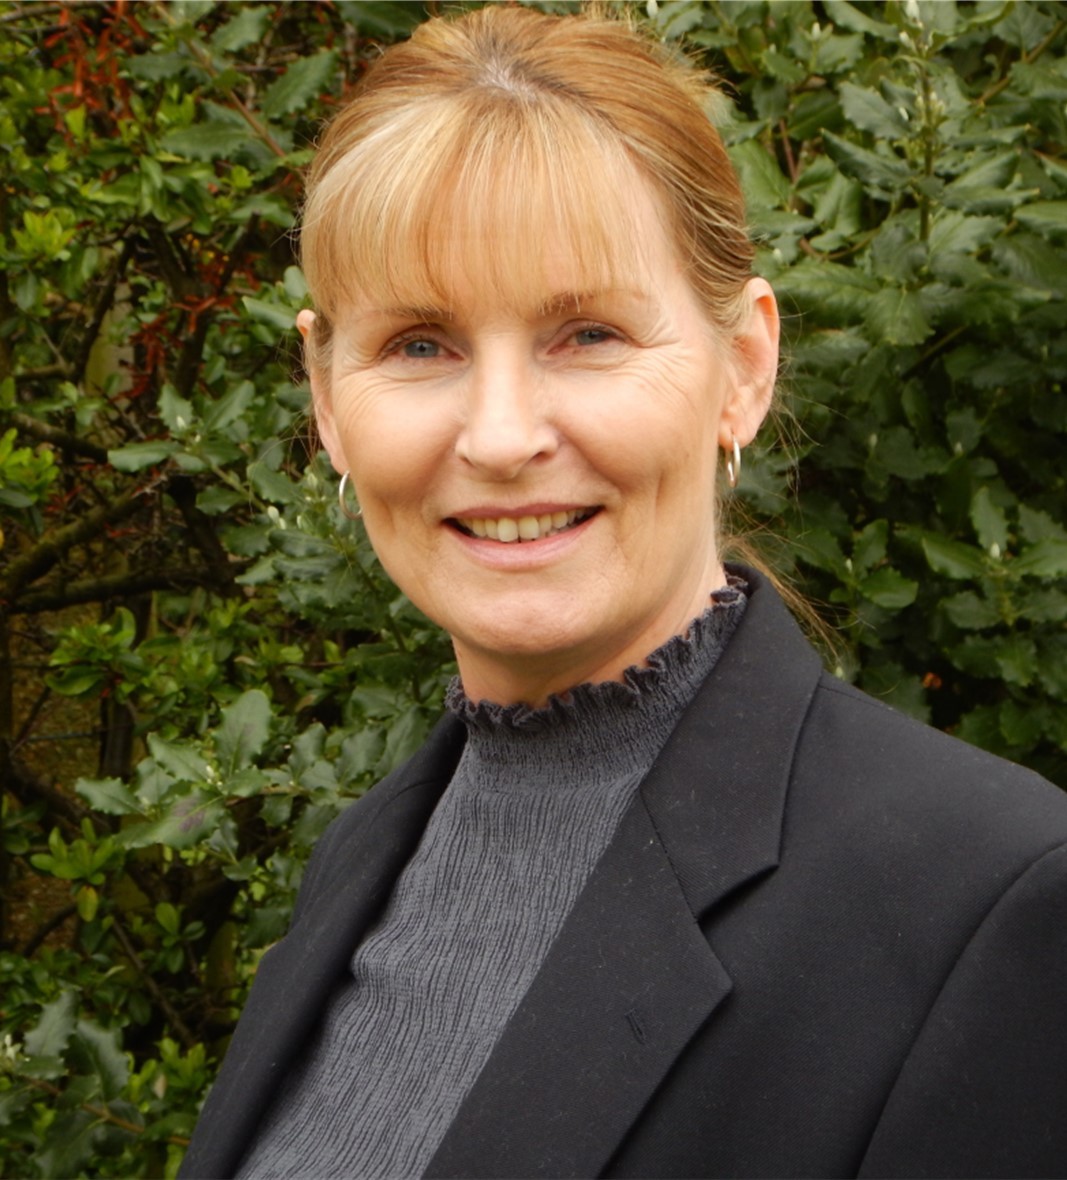 Jane West, Conservative candidate for Bushey North